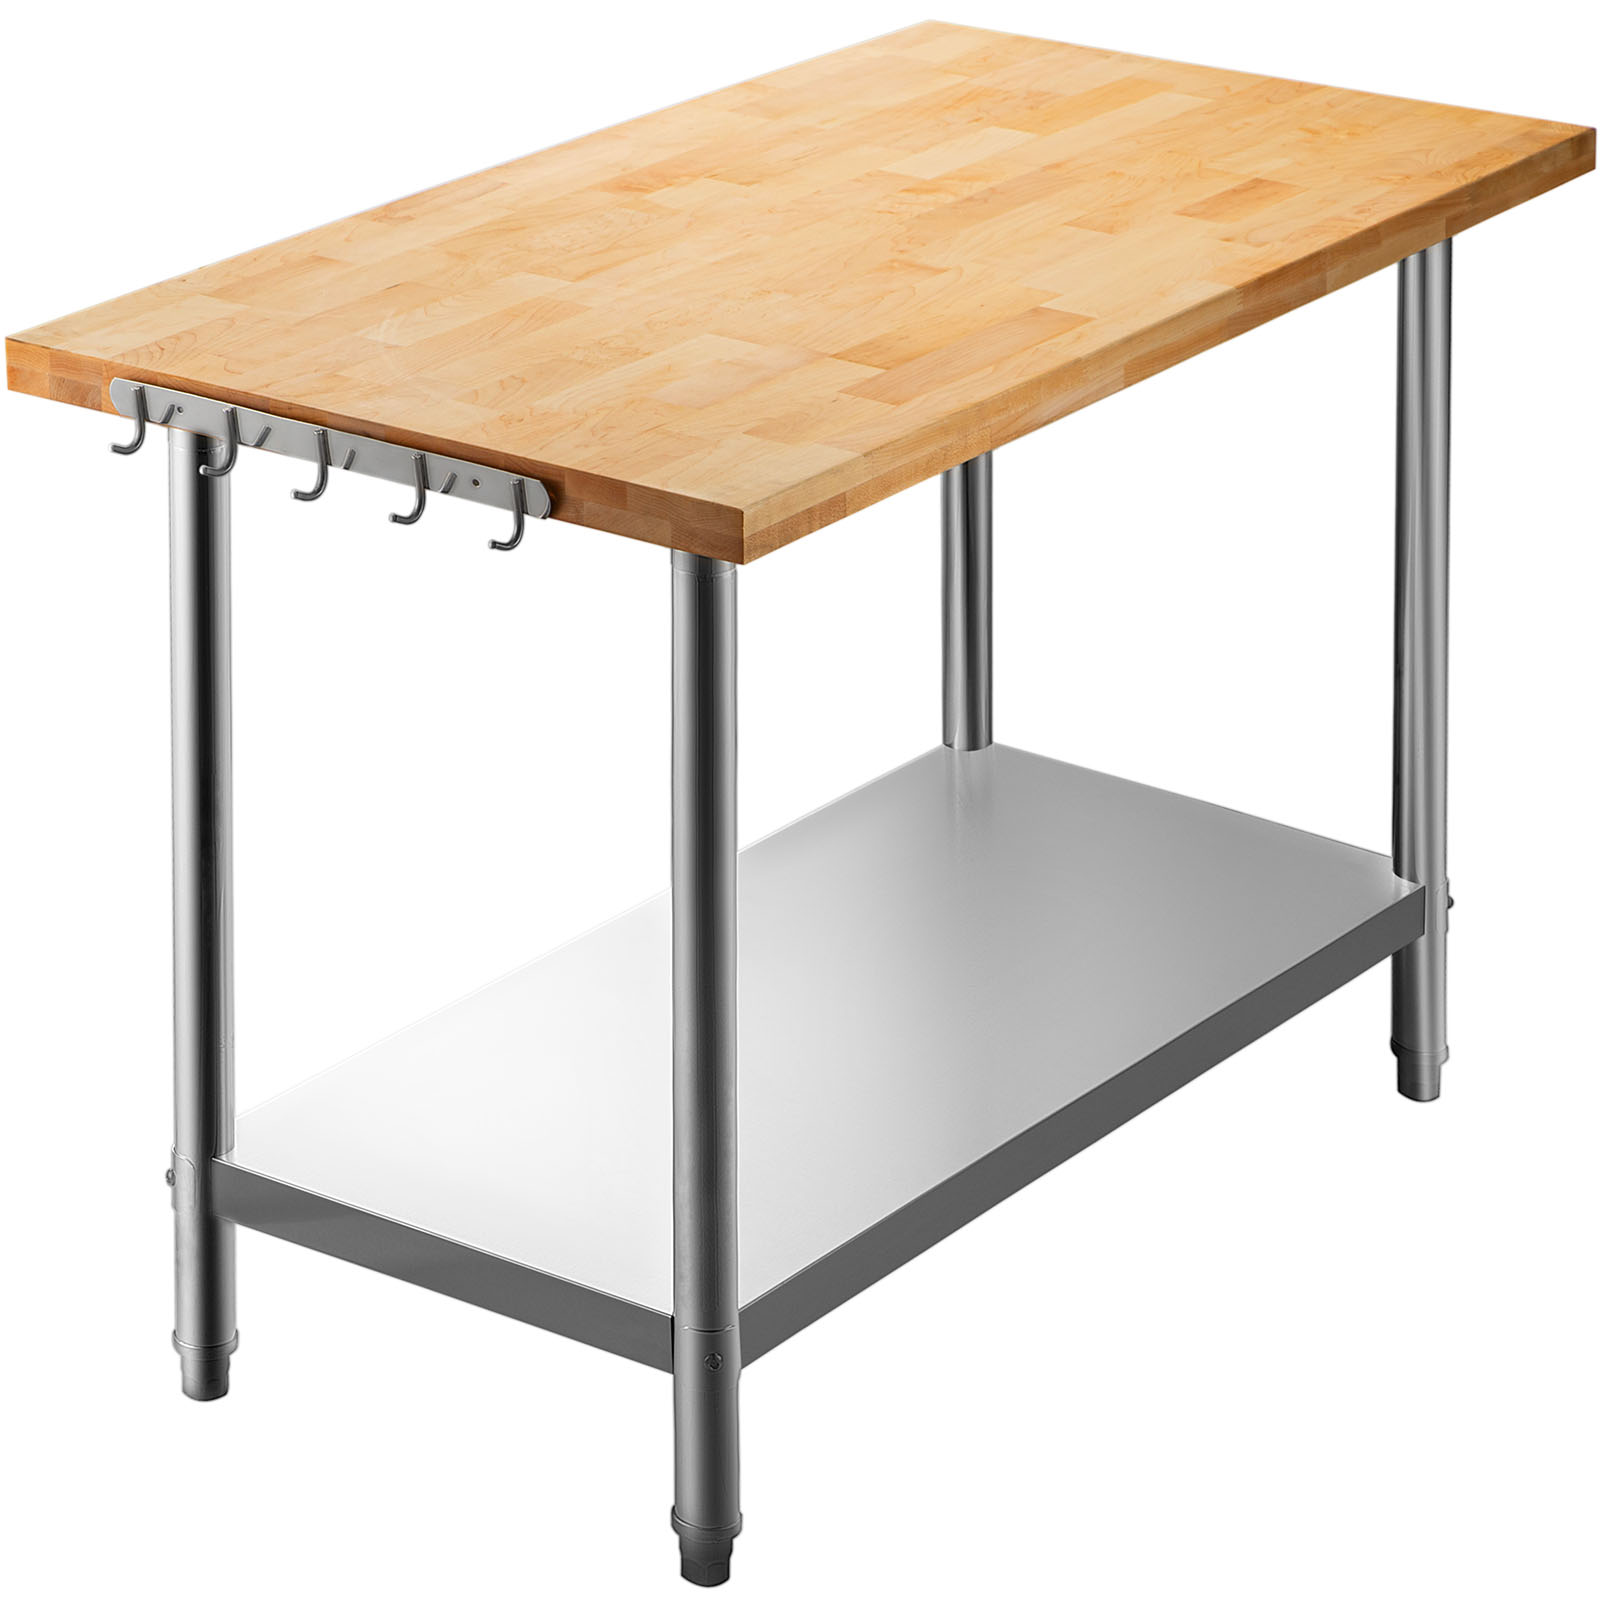 Vevor Maple Top Work Table Kitchen Prep Table Wood 36 X 30 In Stainless Steel от Vevor Many GEOs